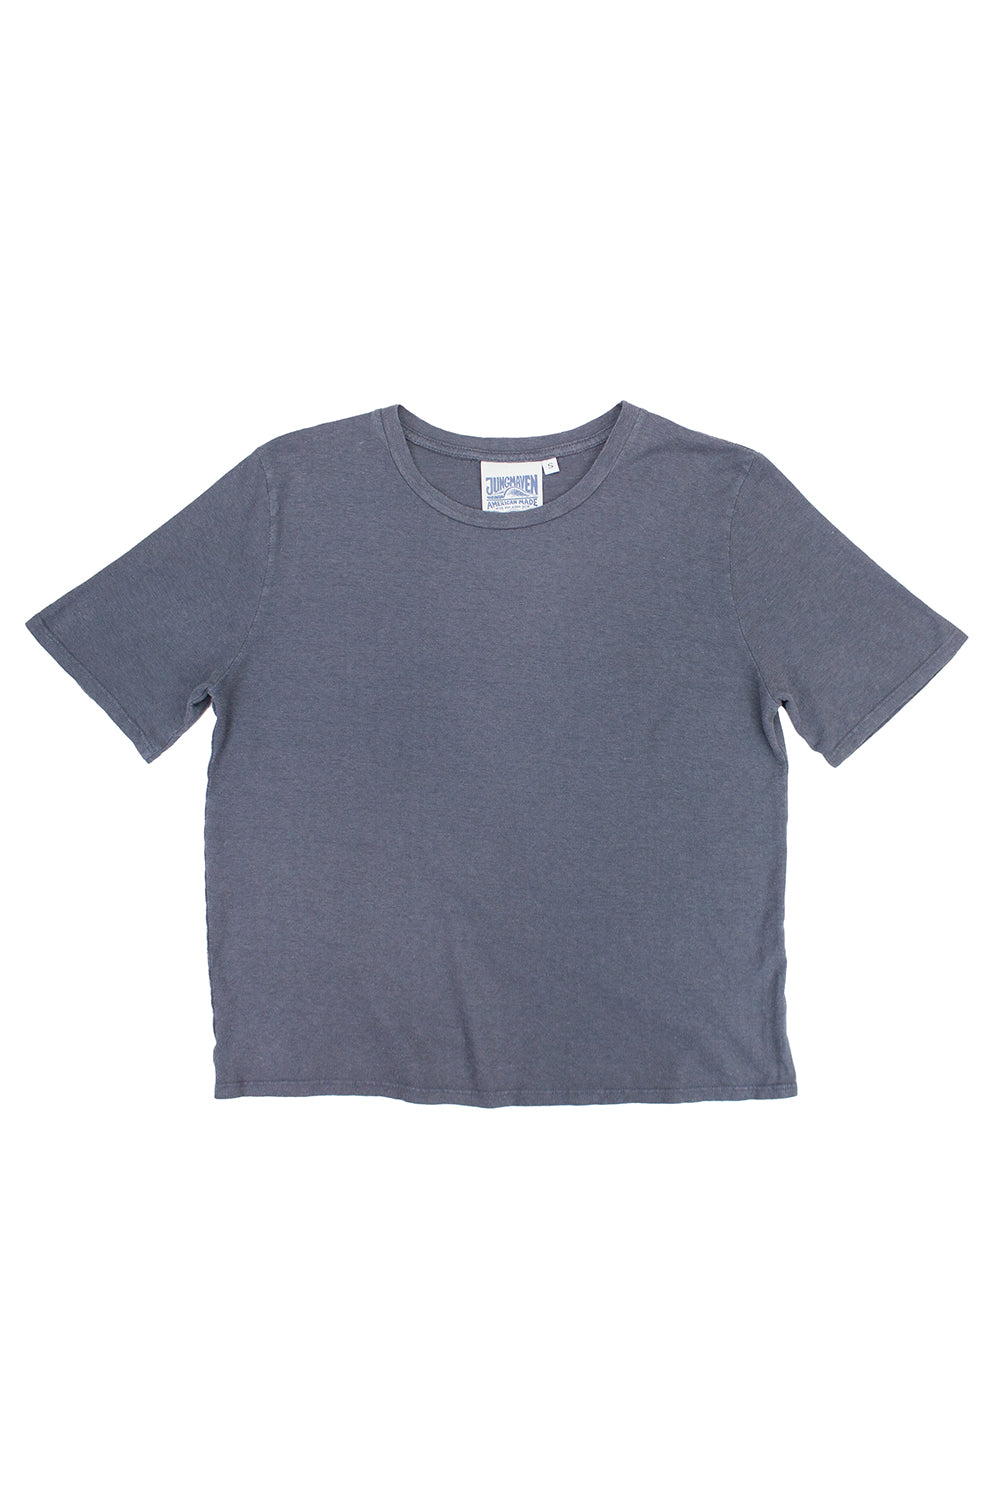 Silverlake Cropped Tee - The Cove Boutique